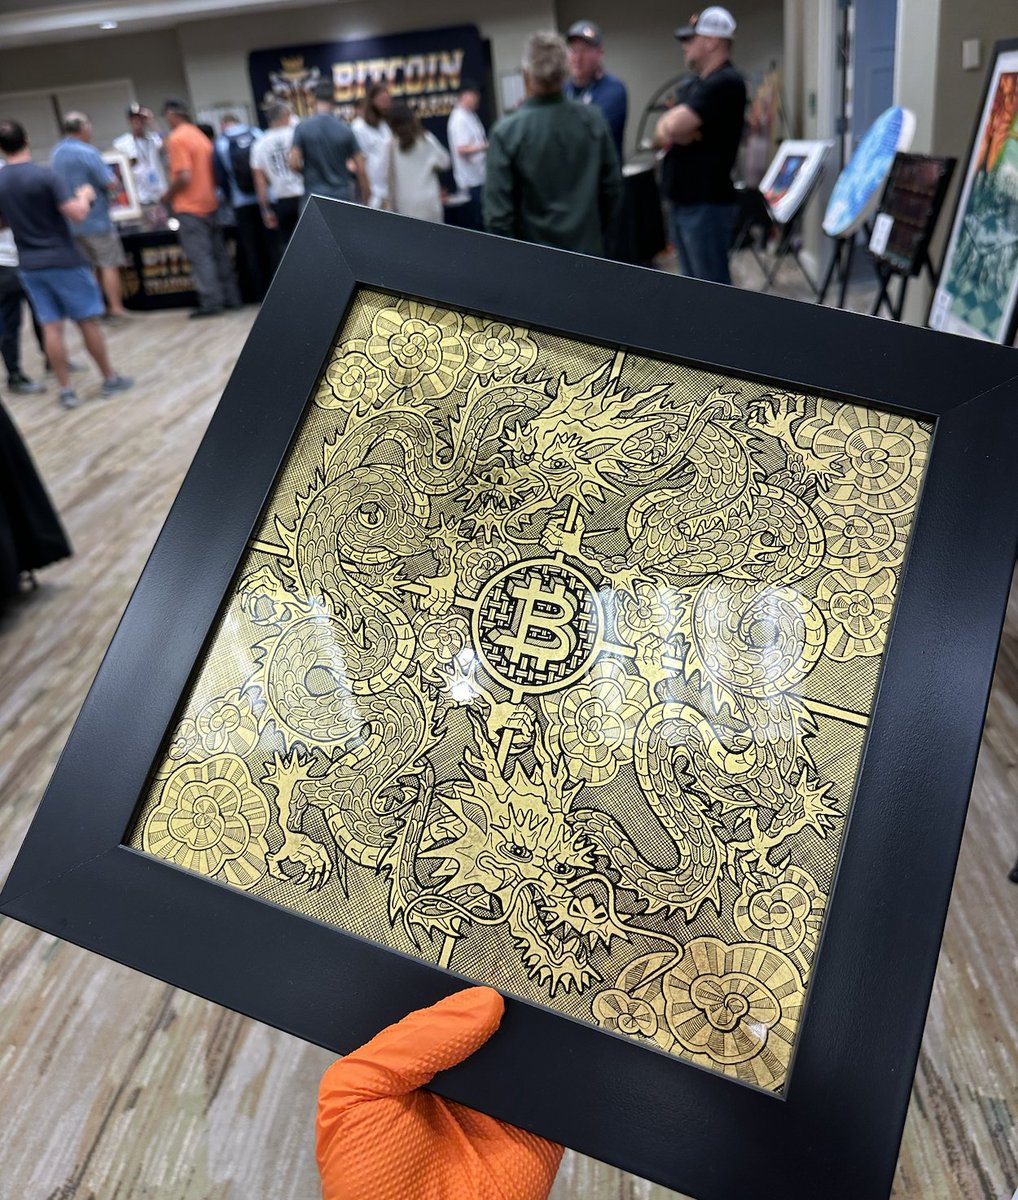 P.s. shoutout @BTCmonk1 + @scarcedotcity for allowing me to collect this beautiful piece of Bitcoin artwork. I'll treasure it forever. Peace and see you all in Nash ✌️